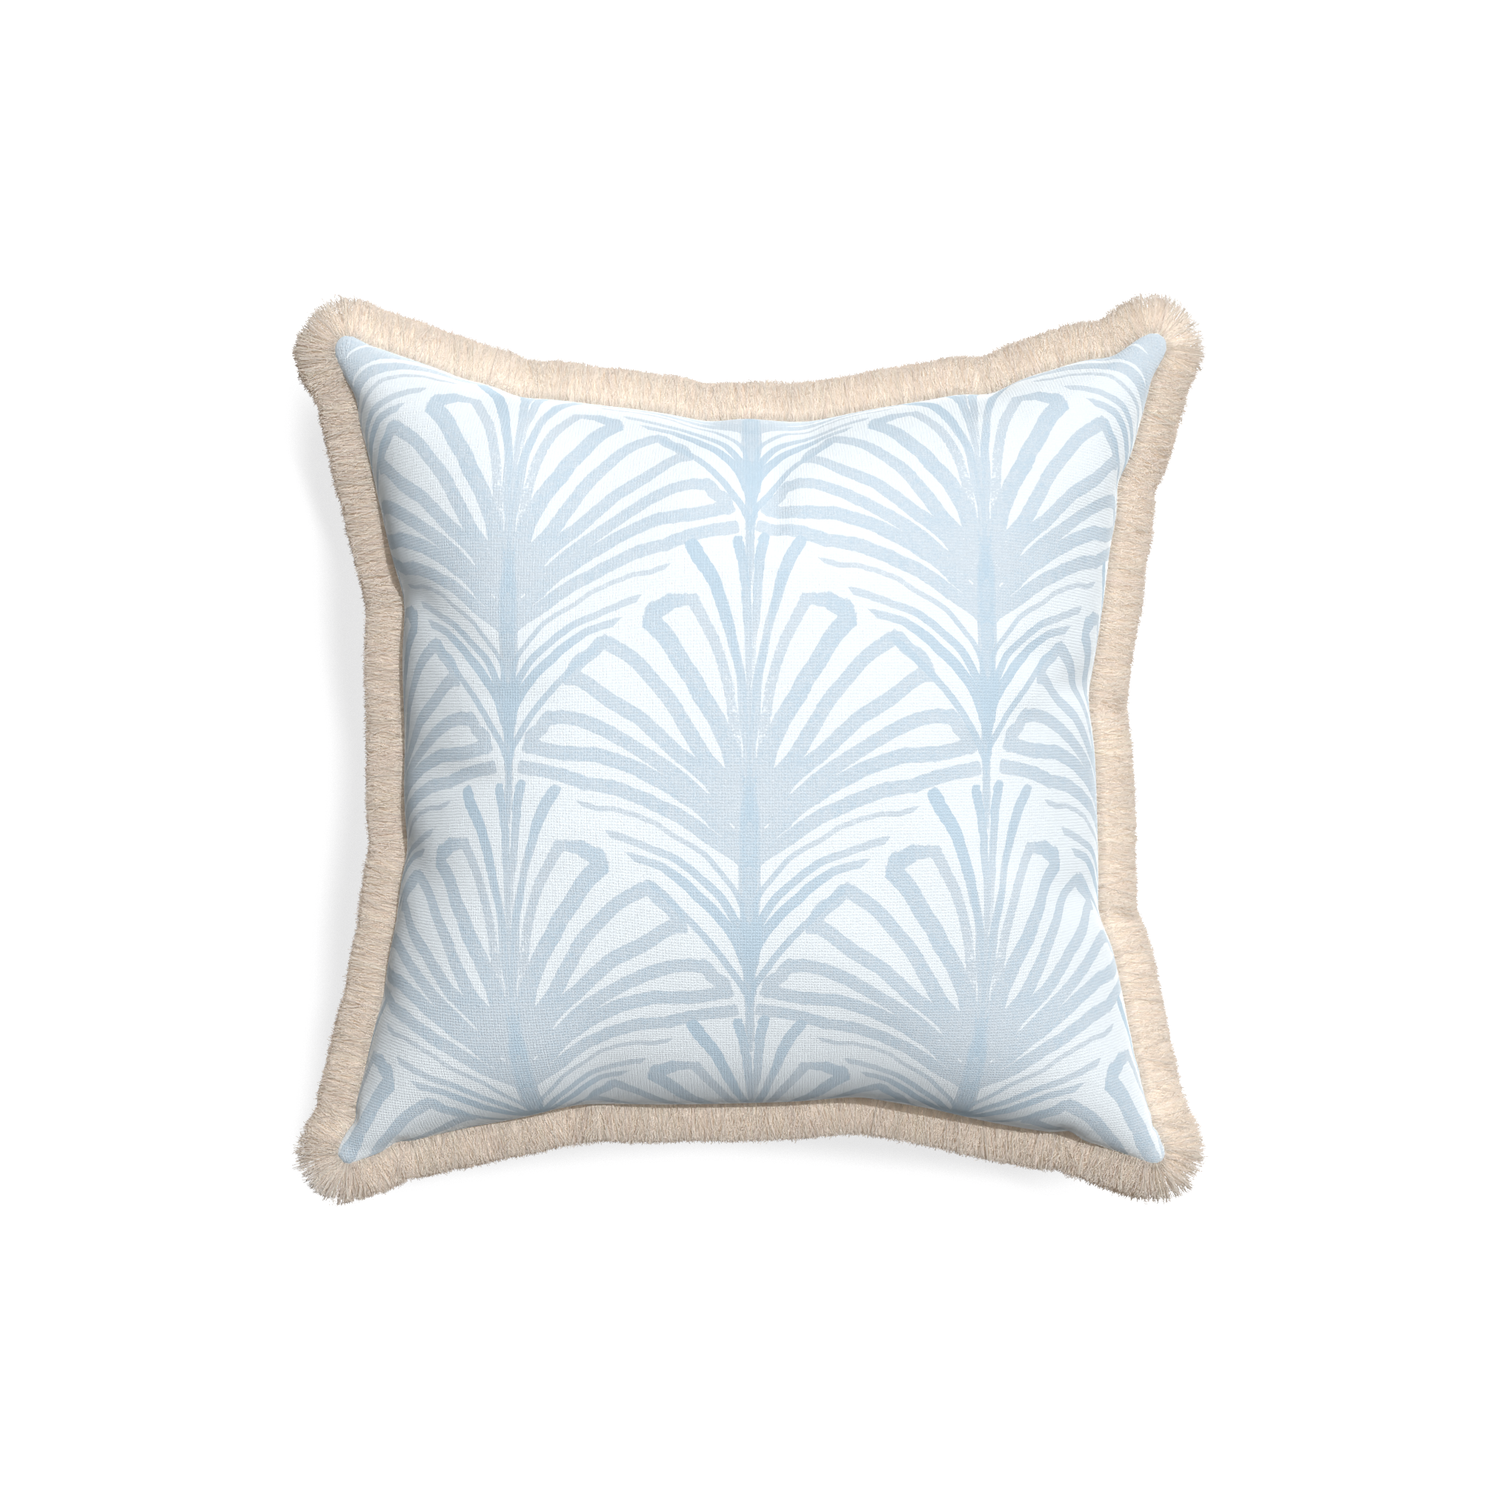 18-square suzy sky custom sky blue palmpillow with cream fringe on white background